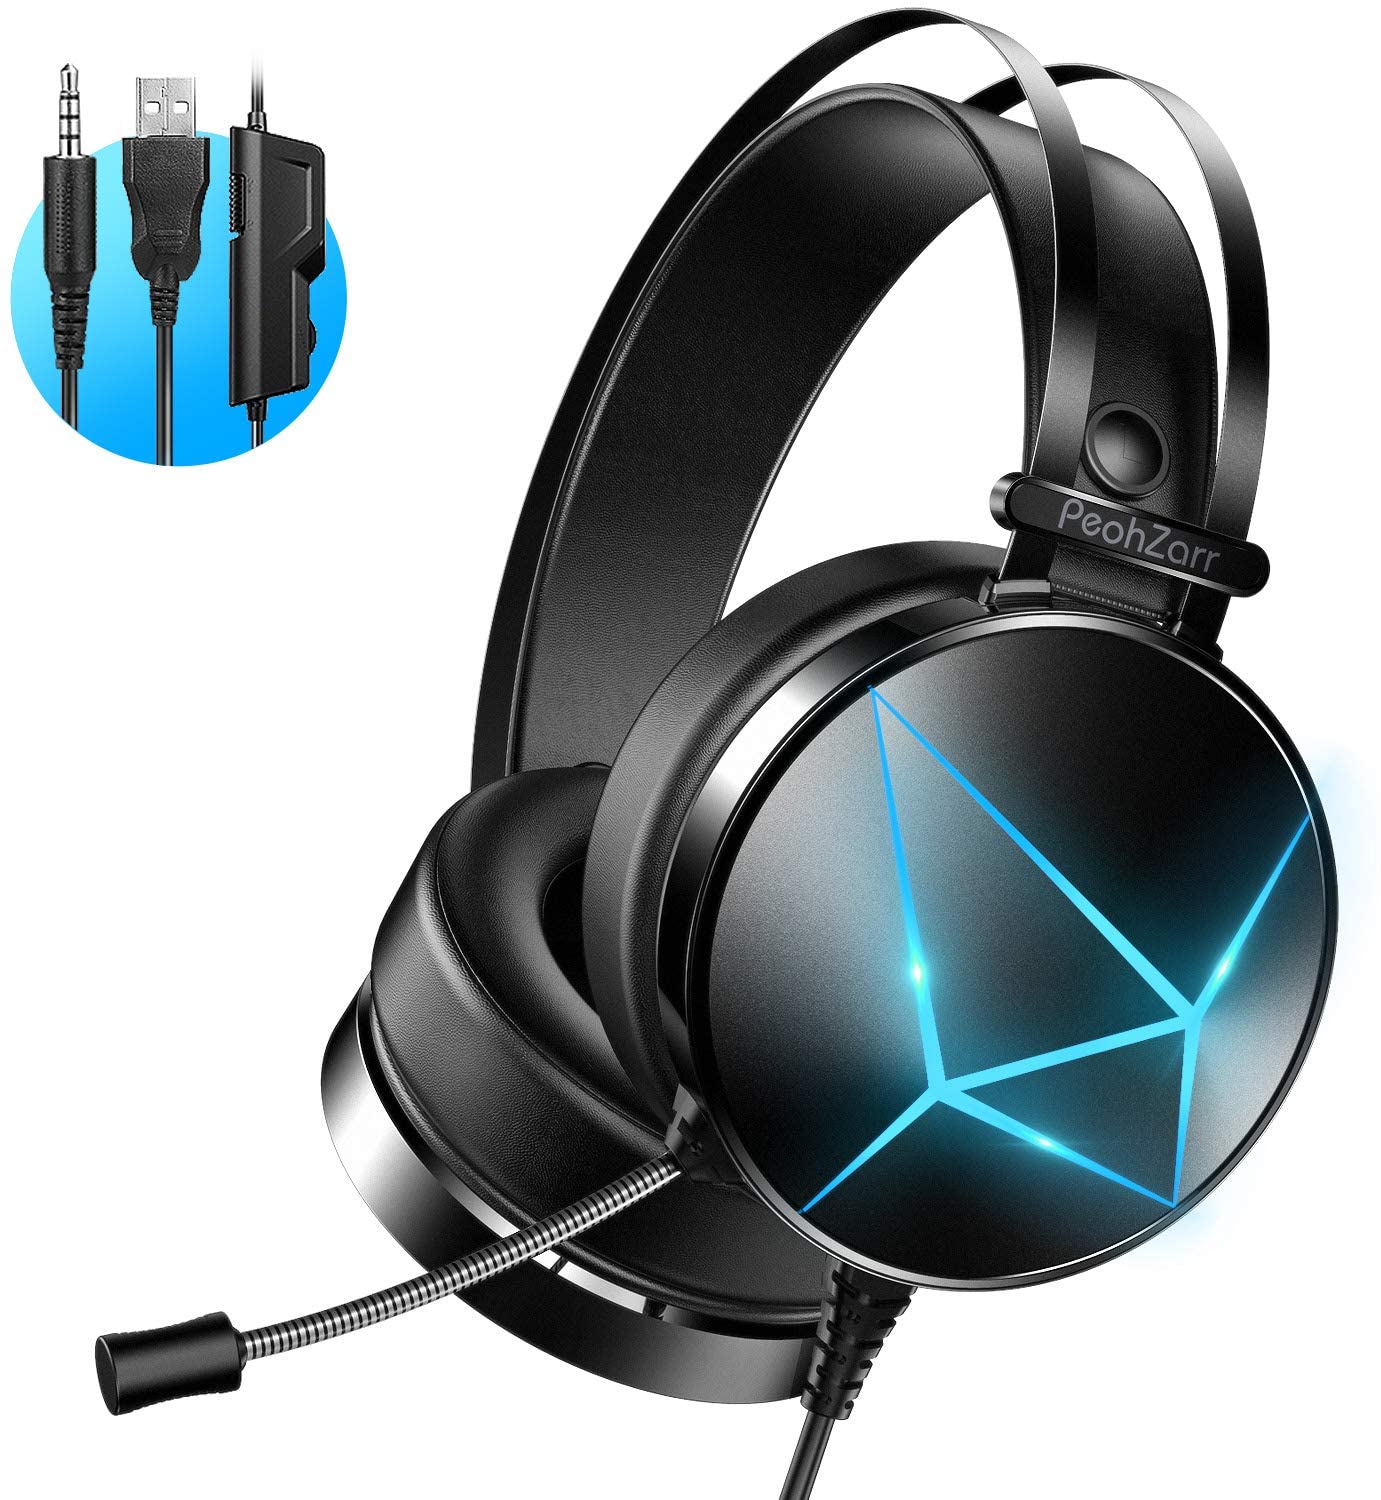 Hear Every Footstep When Use The Best Headset | Reviews, Ratings, Comparisons